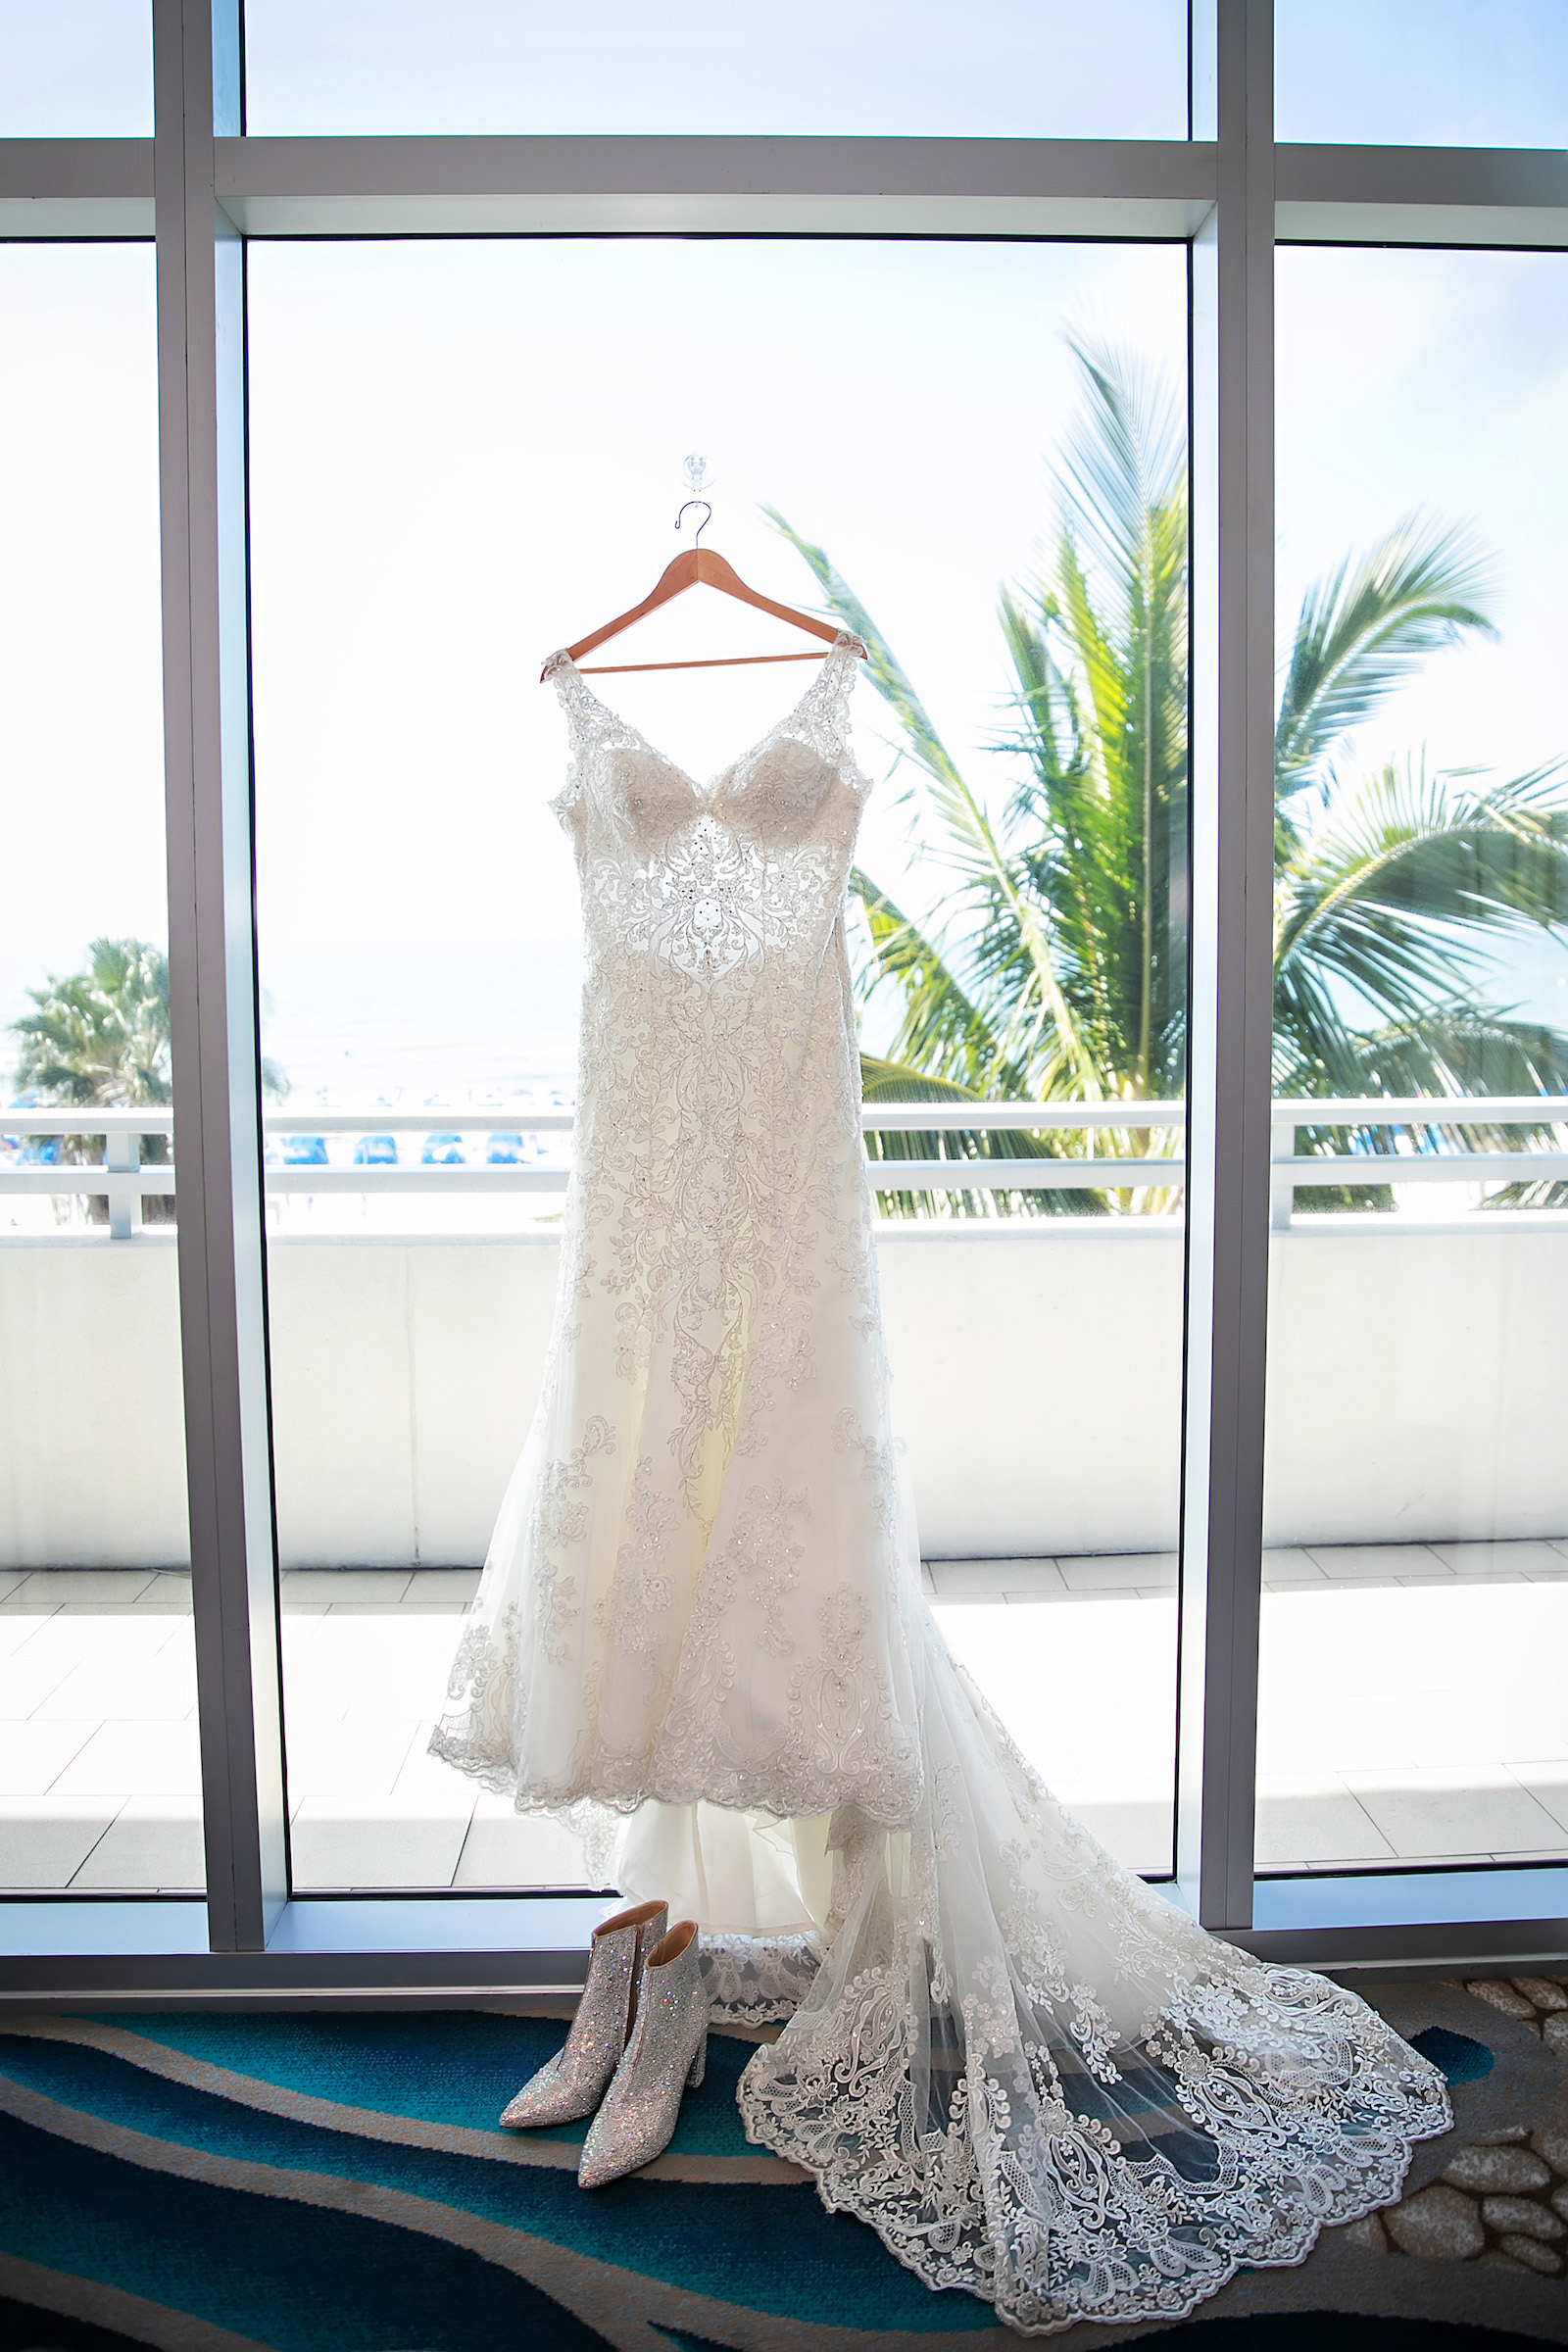 Lace Illusion Wedding Gown with Long Train on Hanger Portrait | Florida Wedding Photographer Limelight Photography